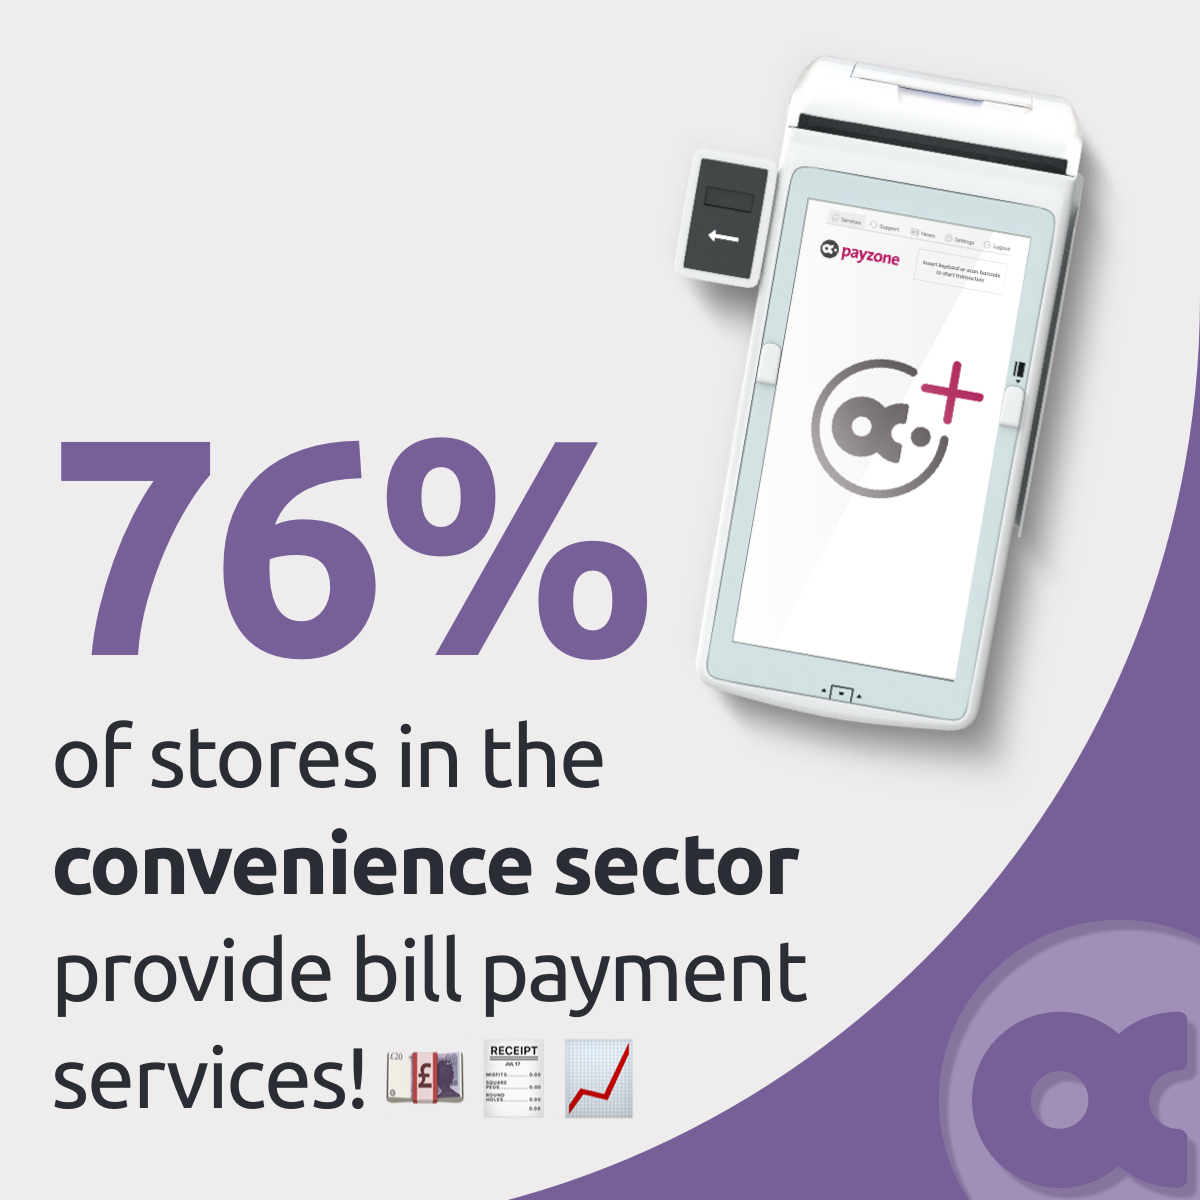 Did you know… 76% of stores in the convenience sector provide bill payment services. Upgrade or add Payzone Plus to your store to provide essential bill payment services to your community. Learn about Payzone Plus: ⬇️ payzone.co.uk/payzoneplus/